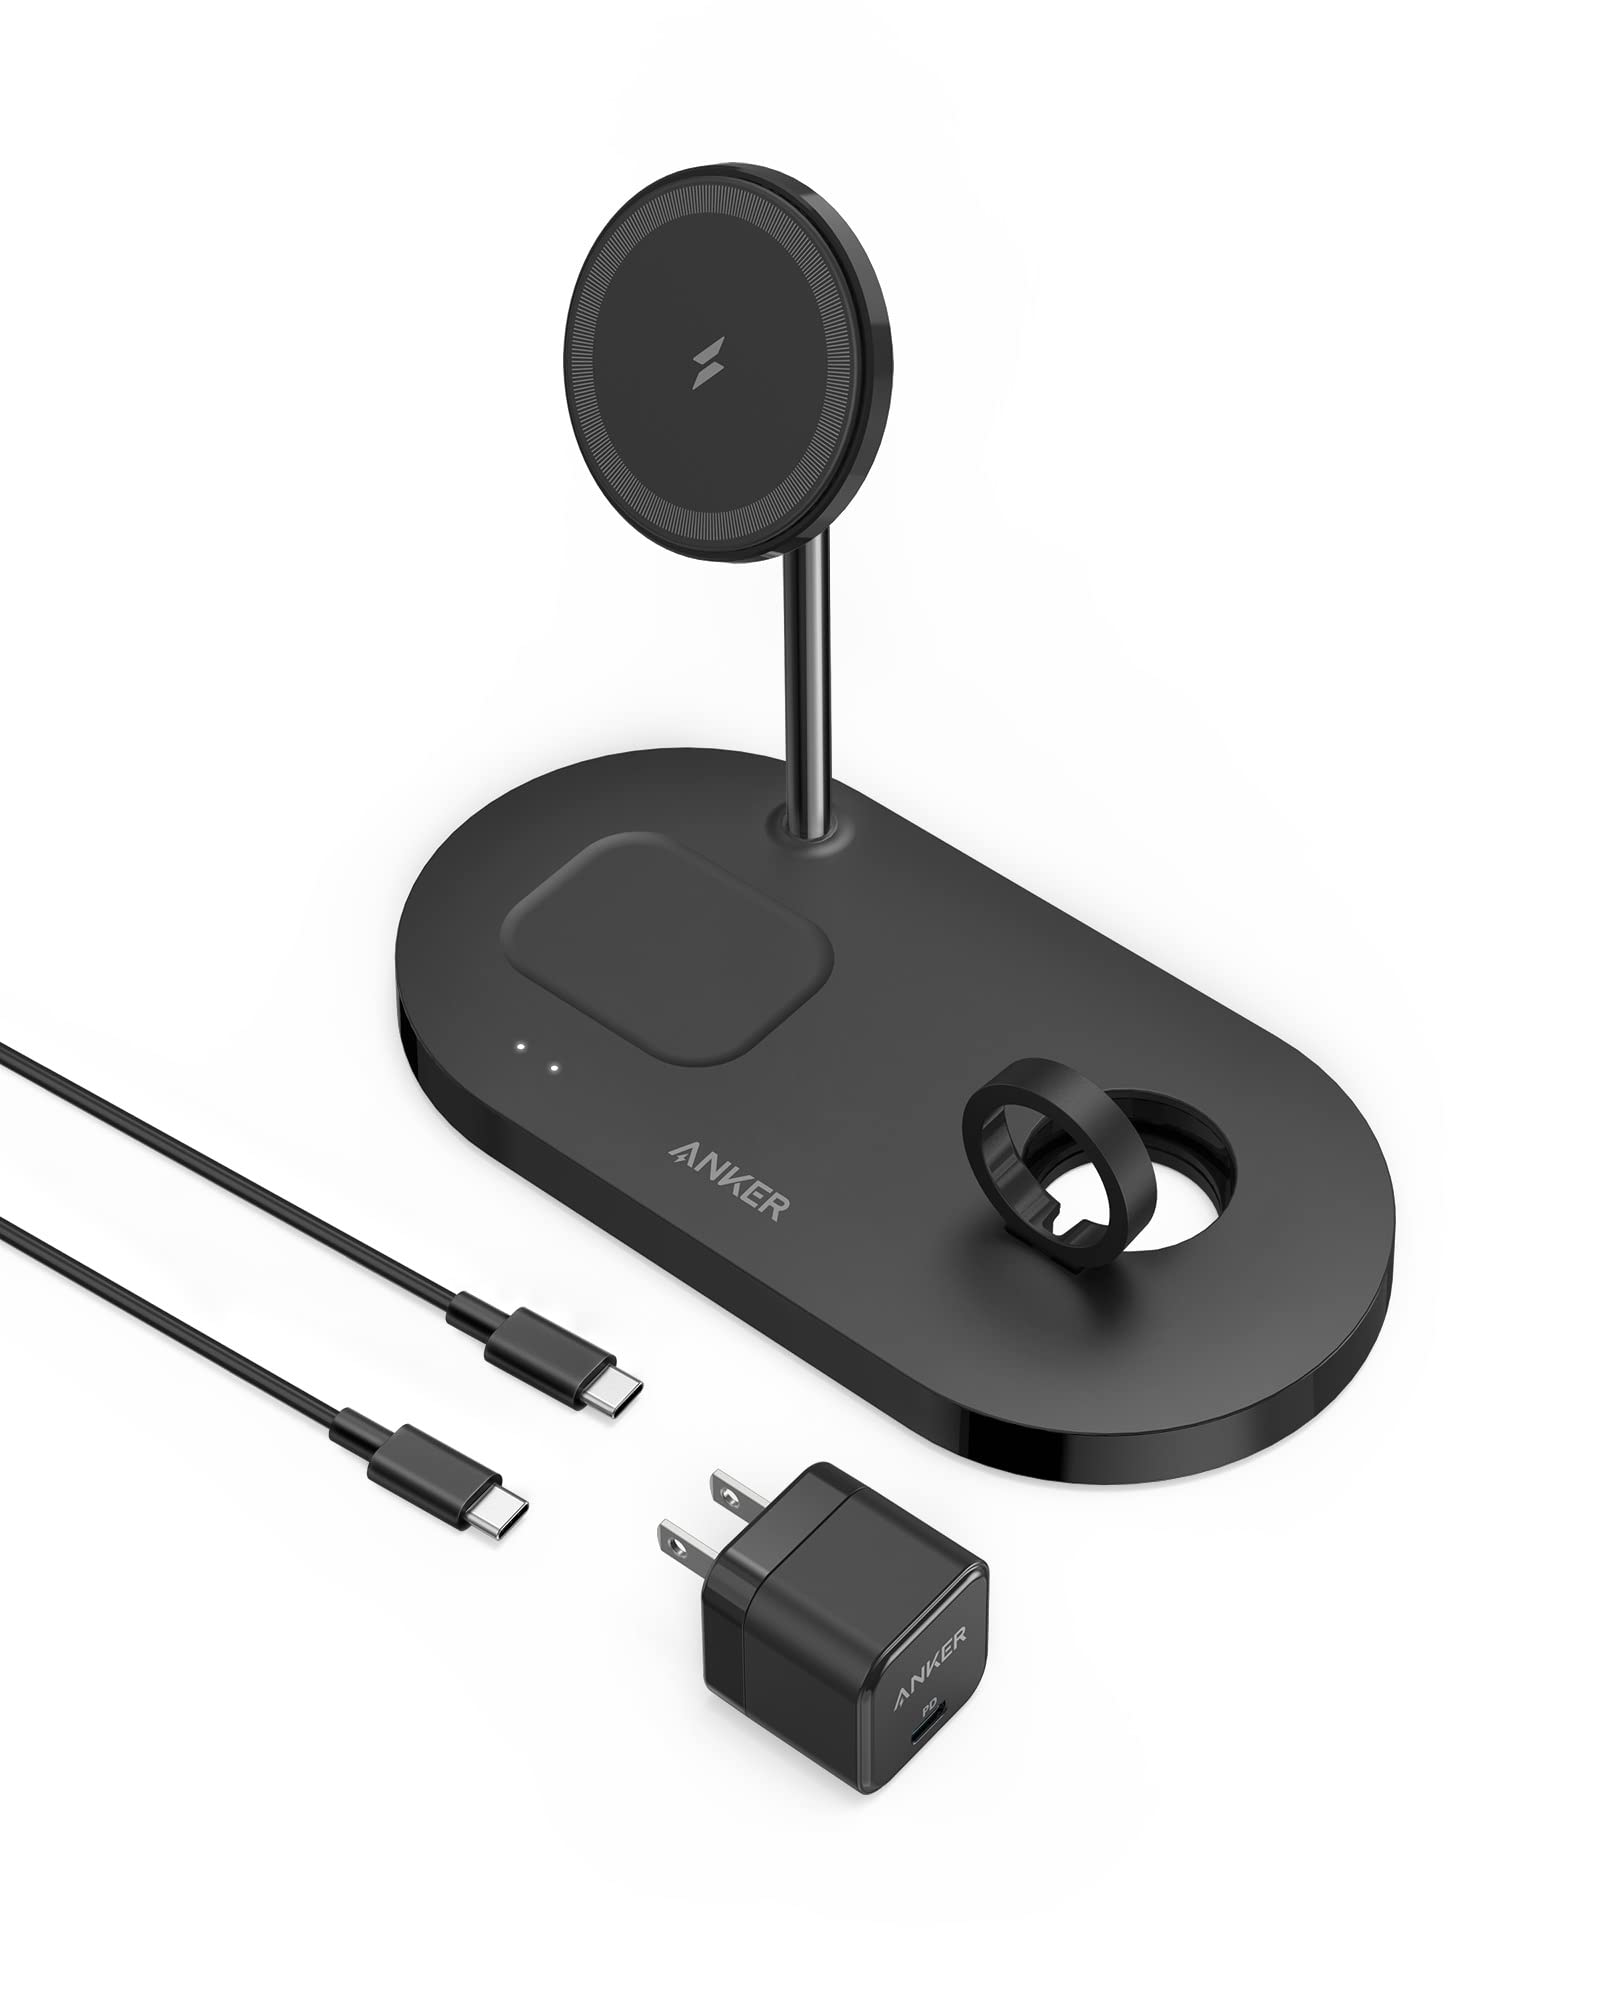 Anker 533 Magnetic Wireless Charger (3-in-1 Stand) (ޥͥåȼ3-in-1 磻쥹ťơ) ڥޥͥåȼ/磻쥹/USB®Ŵ°iPhone 15 / 14 / 13 / 12 ꡼ Apple Watch Ƽб